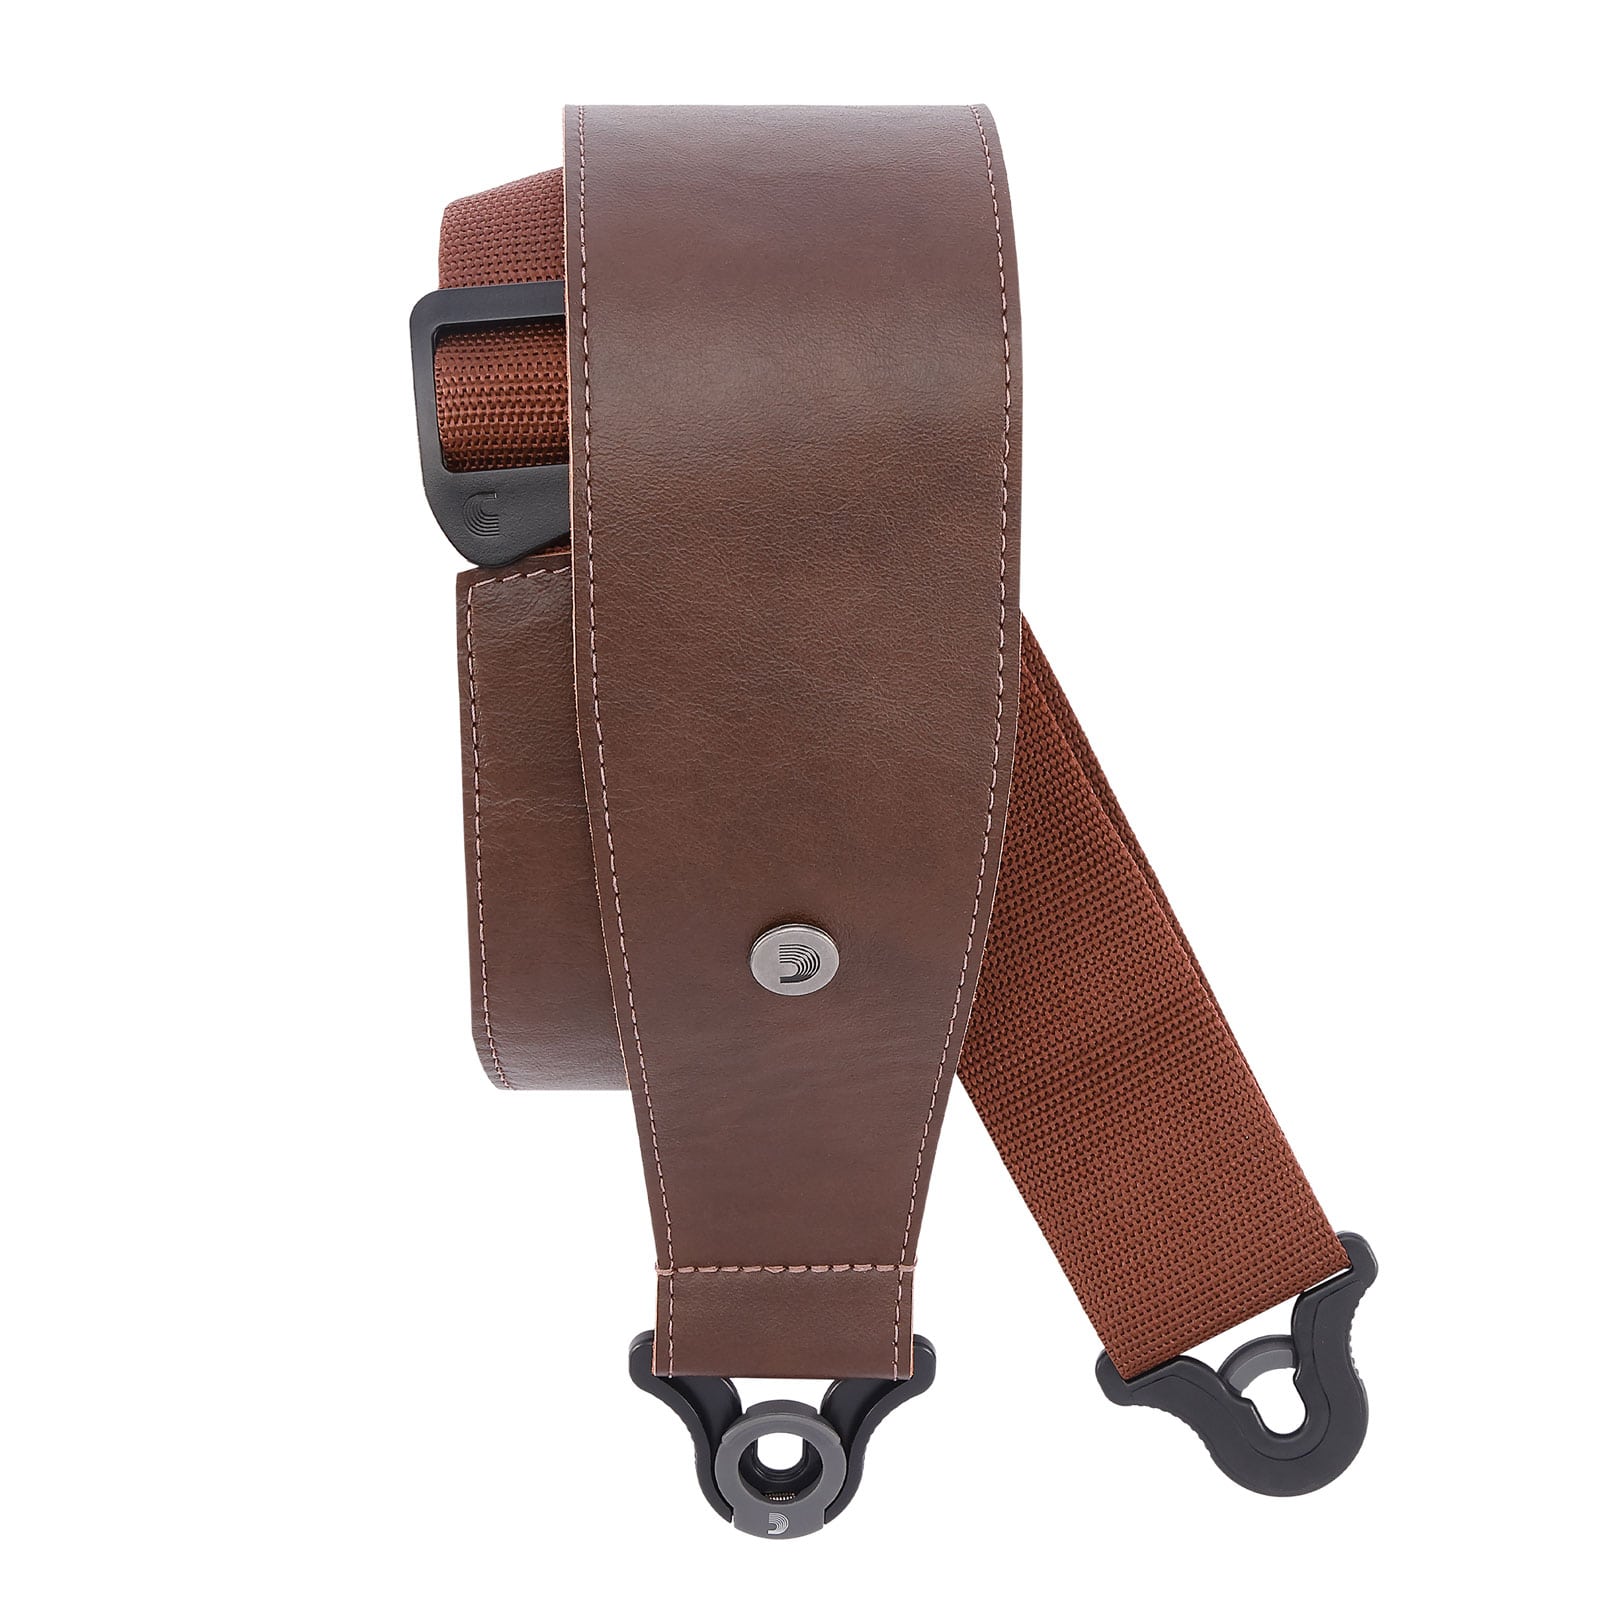 D'ADDARIO AND CO COMFORT LEATHER AUTO LOCK GUITAR STRAP, BROWN